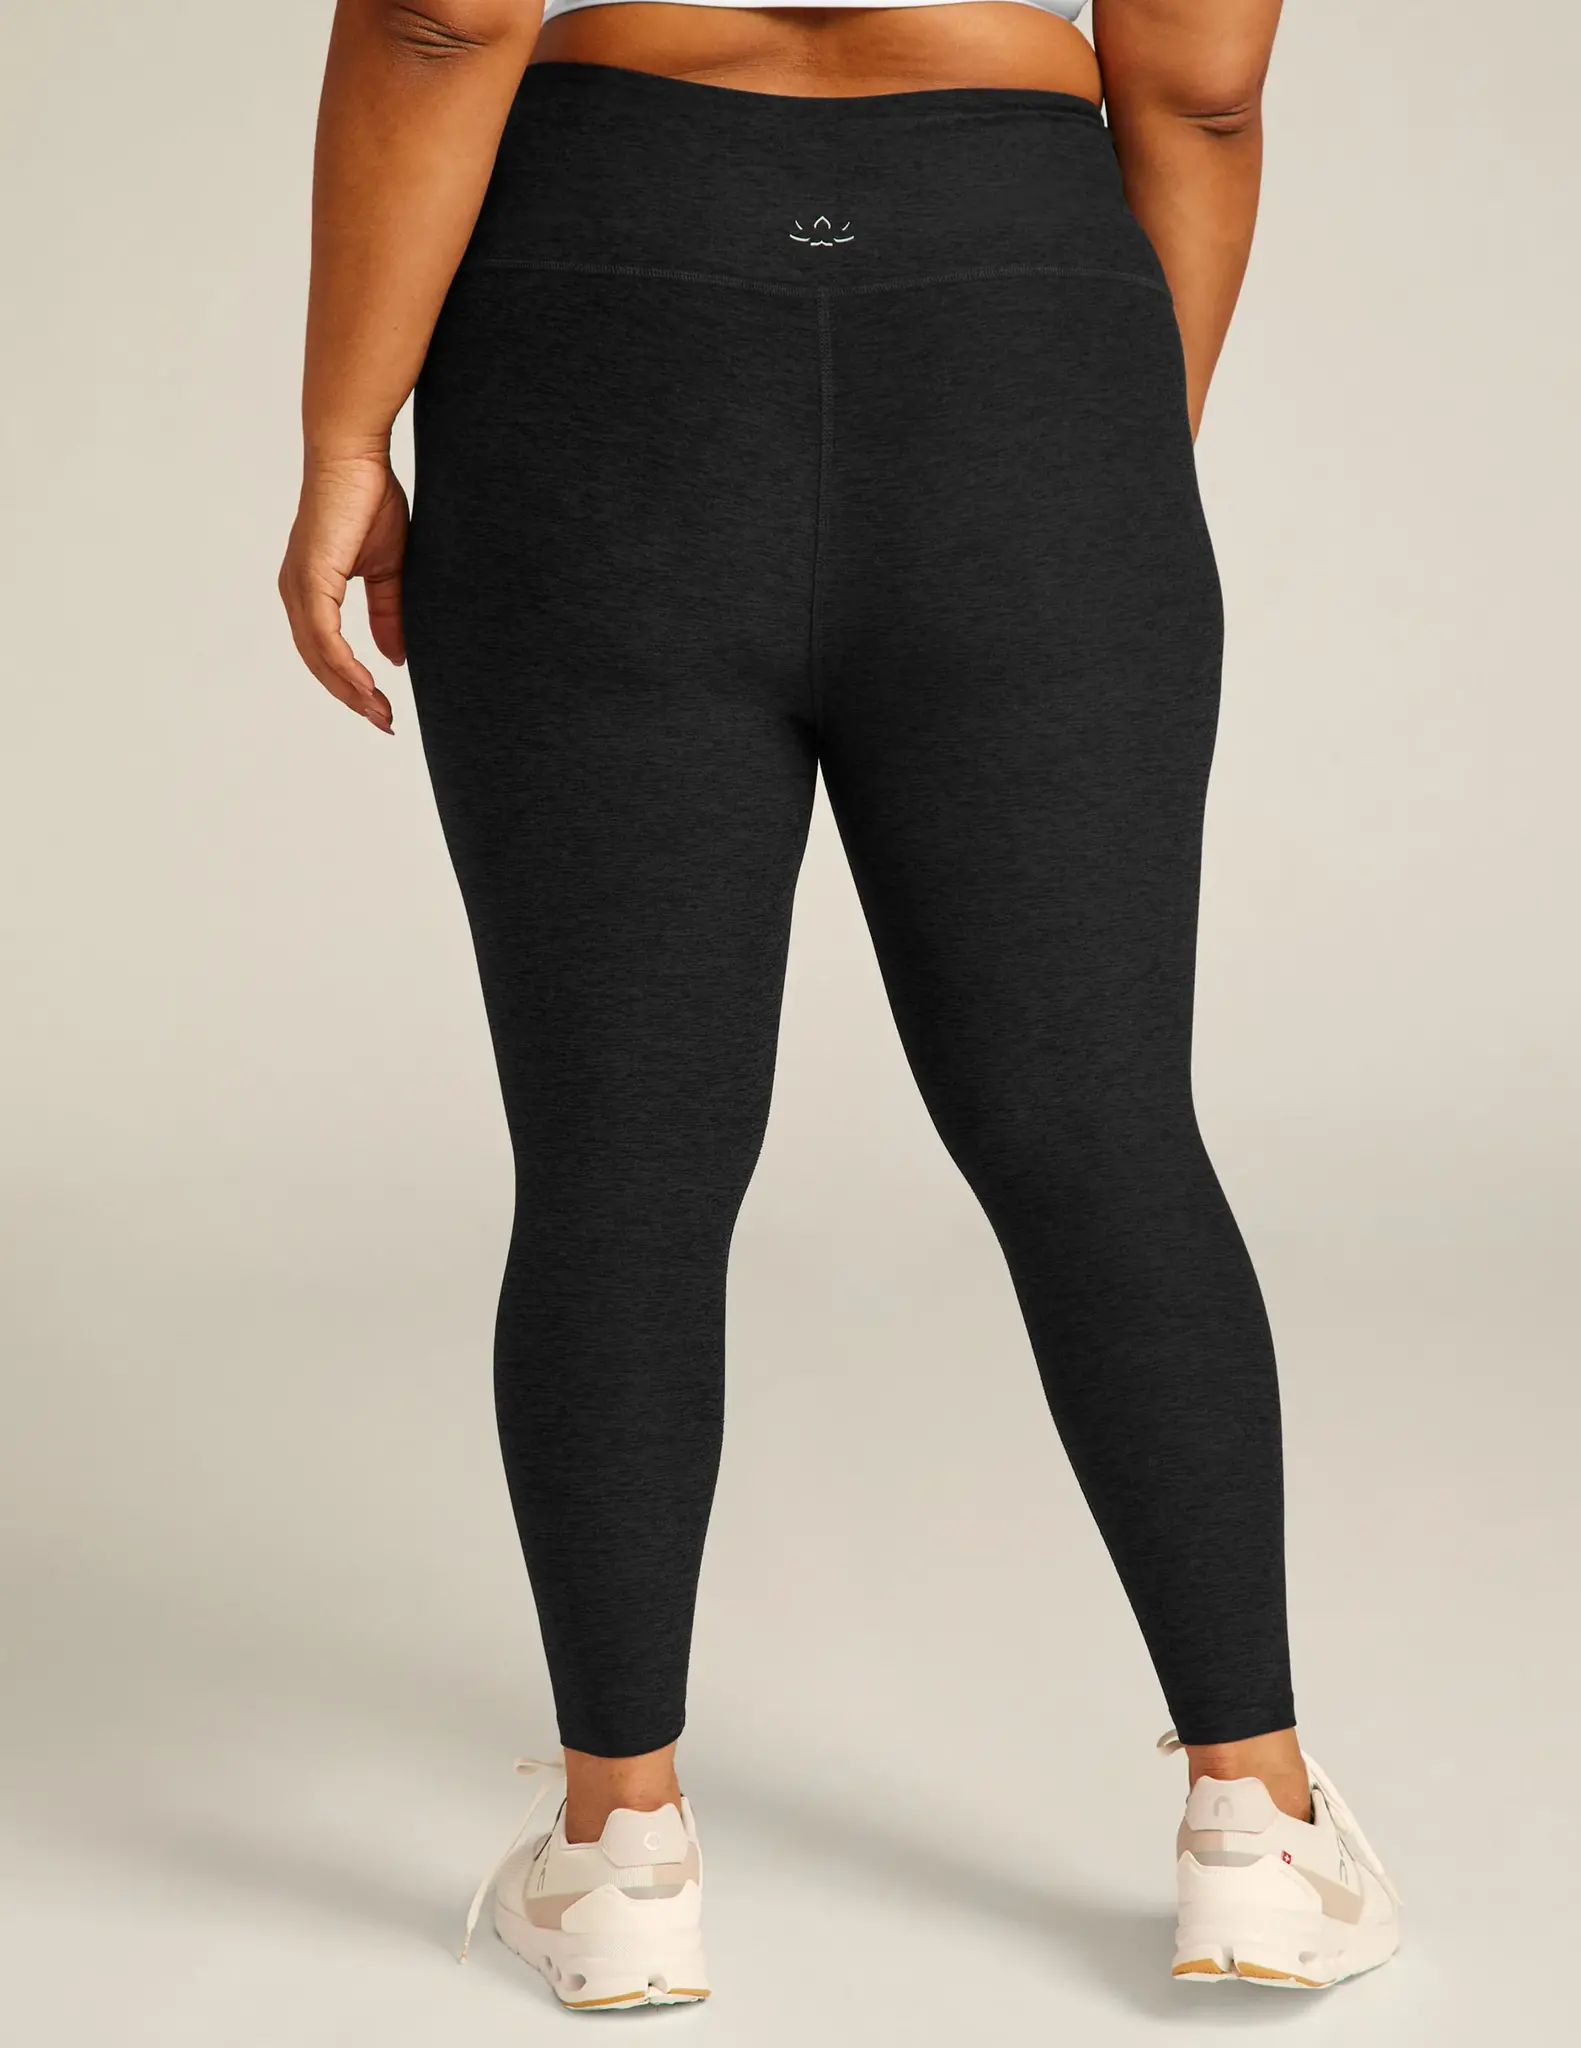 Beyond Yoga Spacedye Caught In The Midi High Waisted Legging  Workout  attire, Stylish workout clothes, High waisted leggings